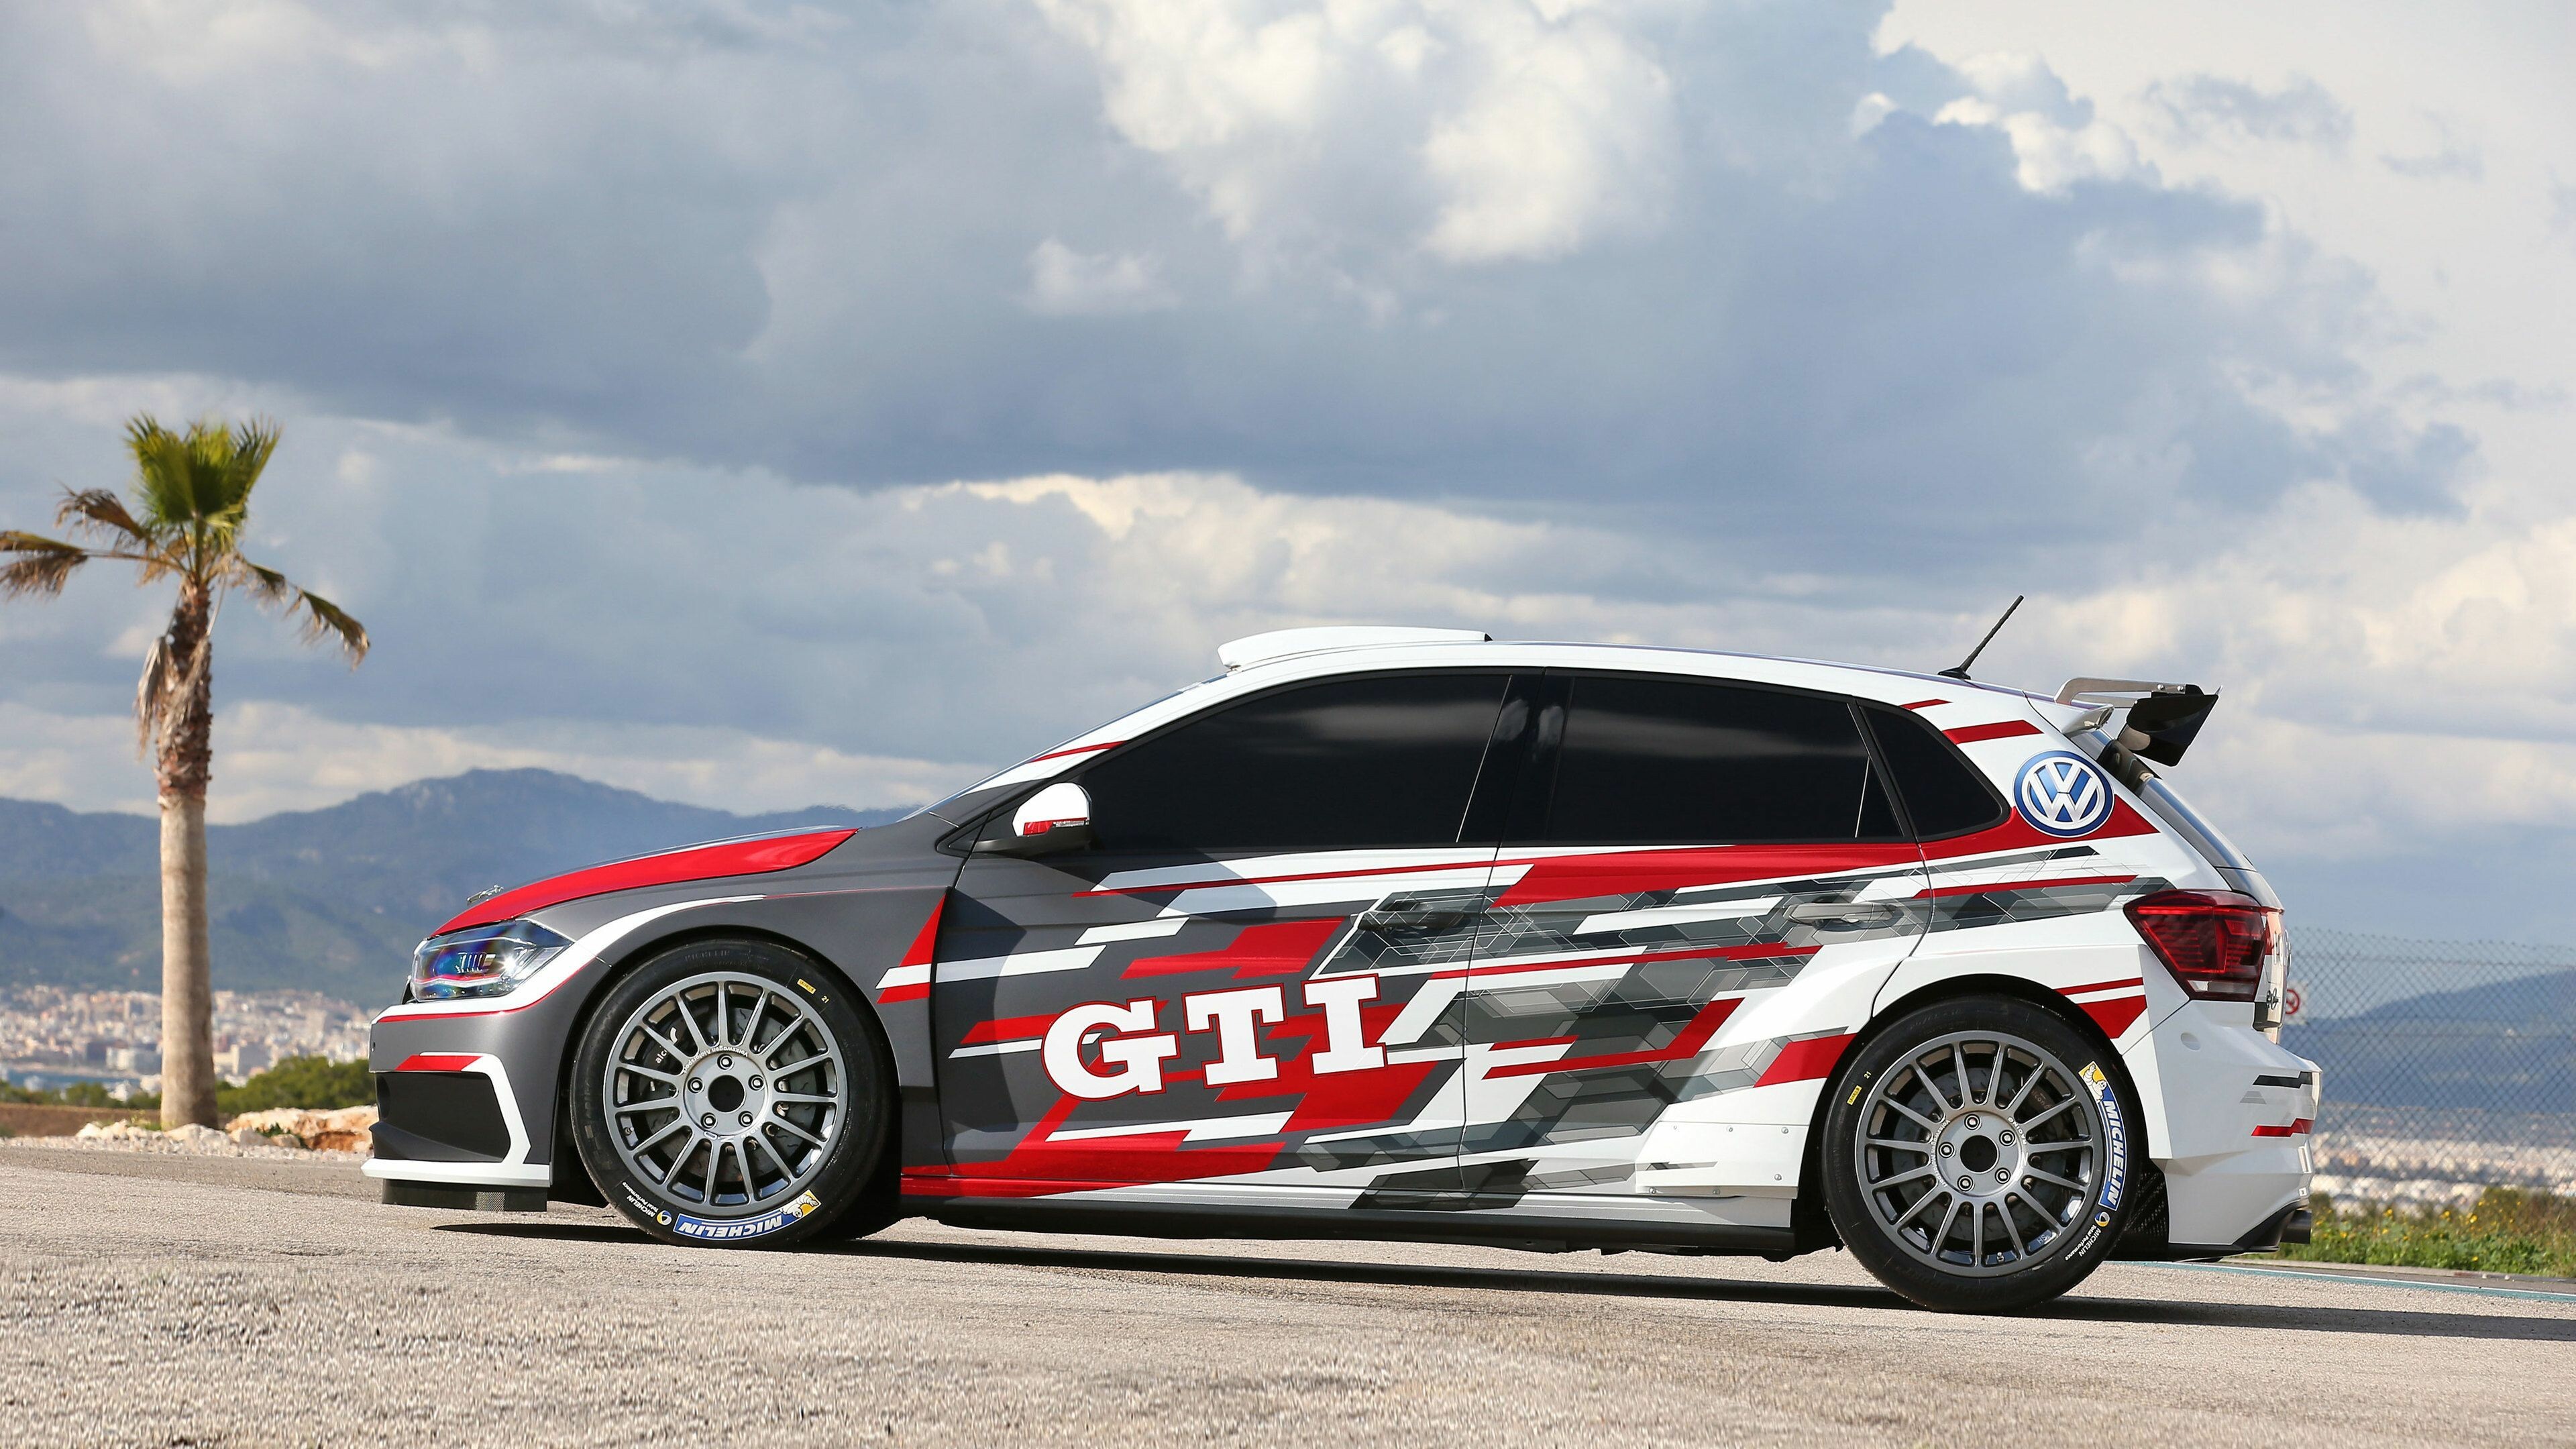 Volkswagen: Polo GTI R5, A rally car built by VW Motorsport and based upon the VW Polo road car. 3840x2160 4K Wallpaper.